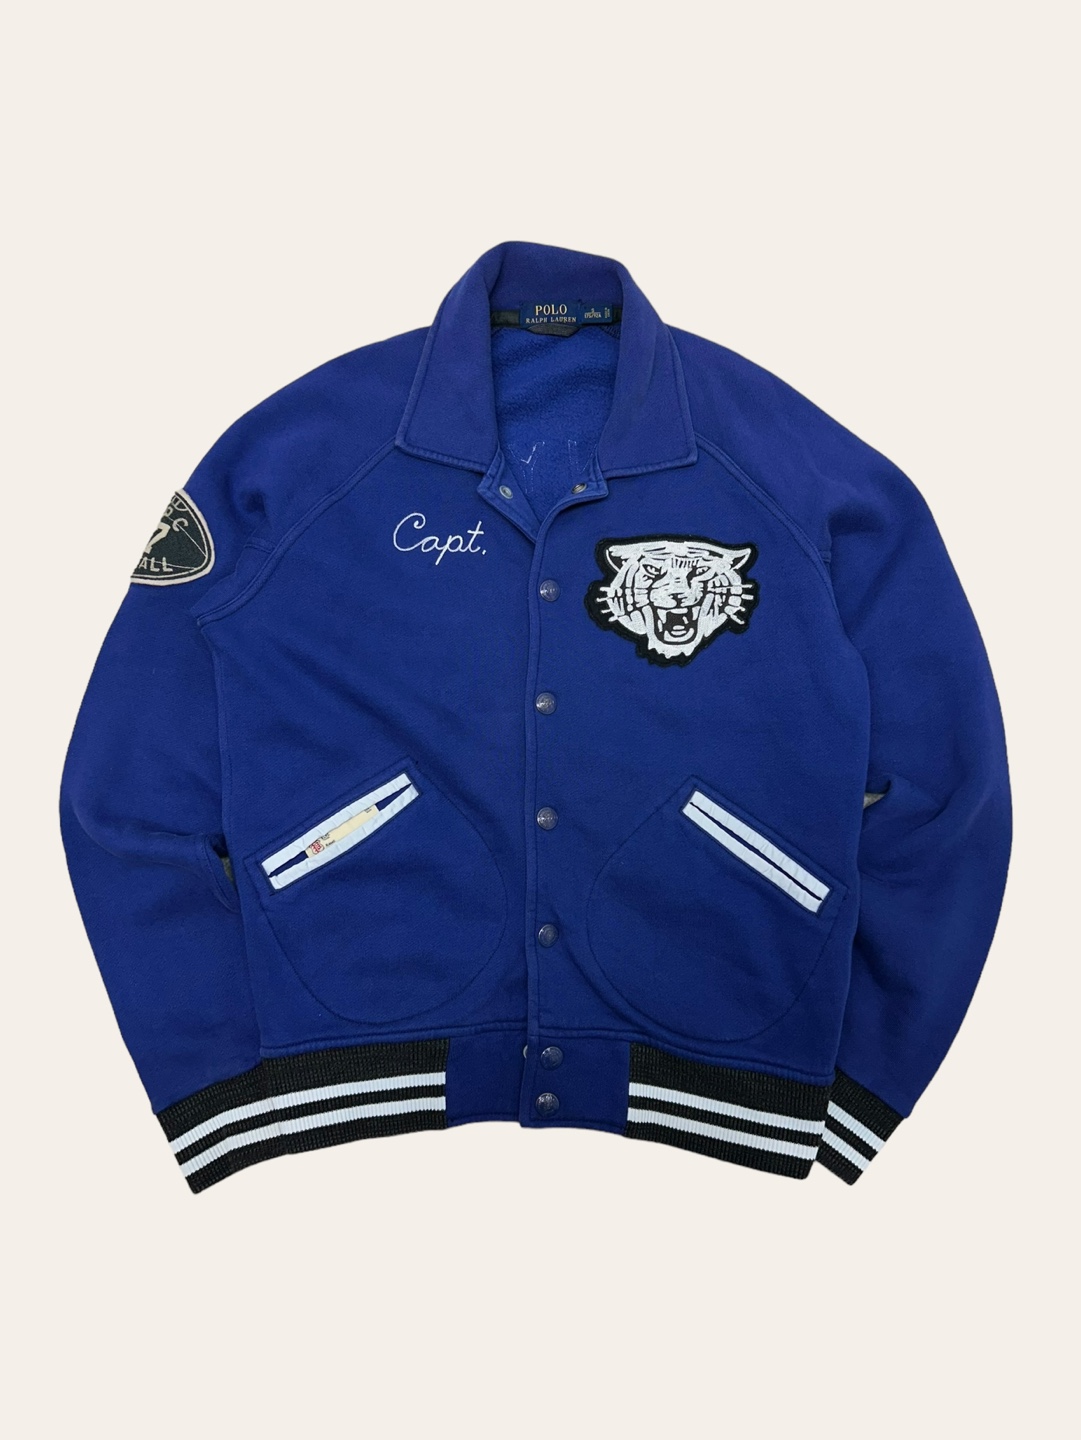 Polo ralph lauren blue tiger patched varsity jacket S